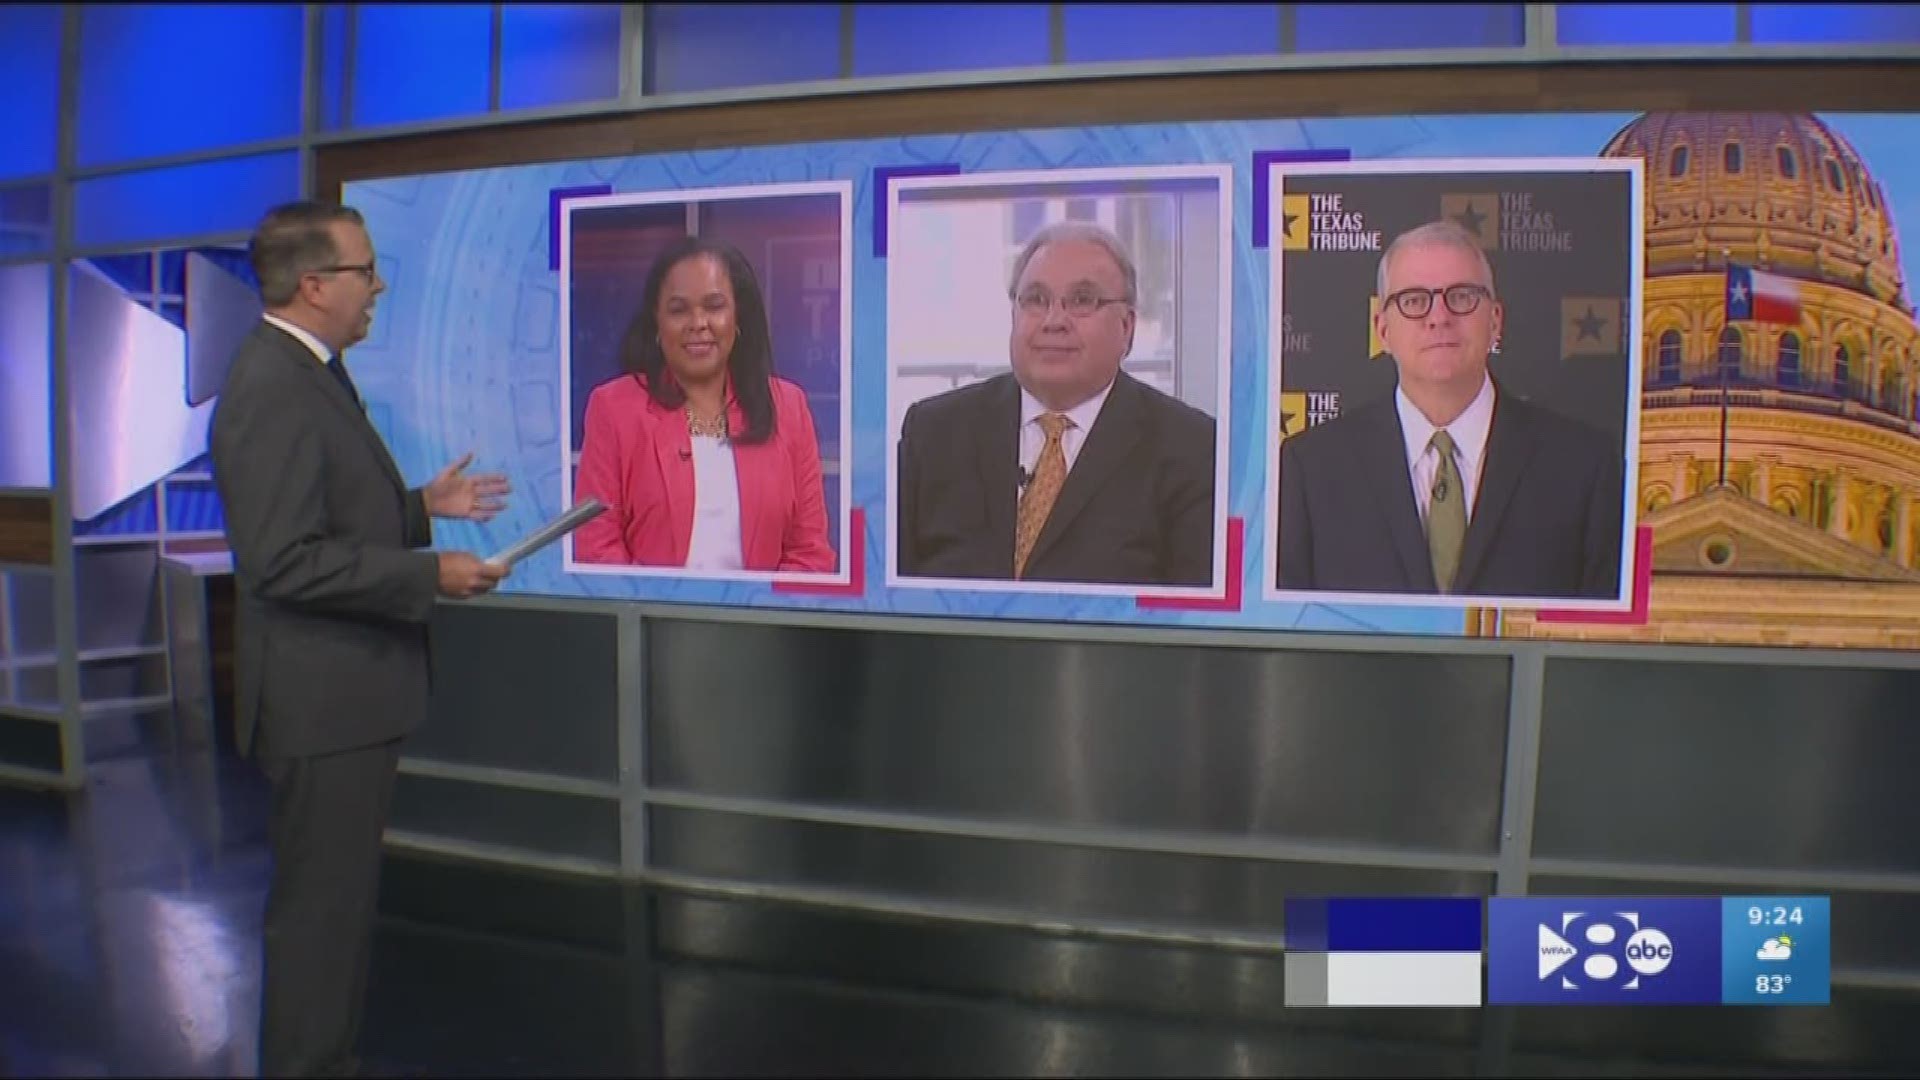 Reporters Roundtable puts the headlines in perspective each week. Host Jason, Bud and Ross returned along with Berna Dean Steptoe, WFAA's political producer.